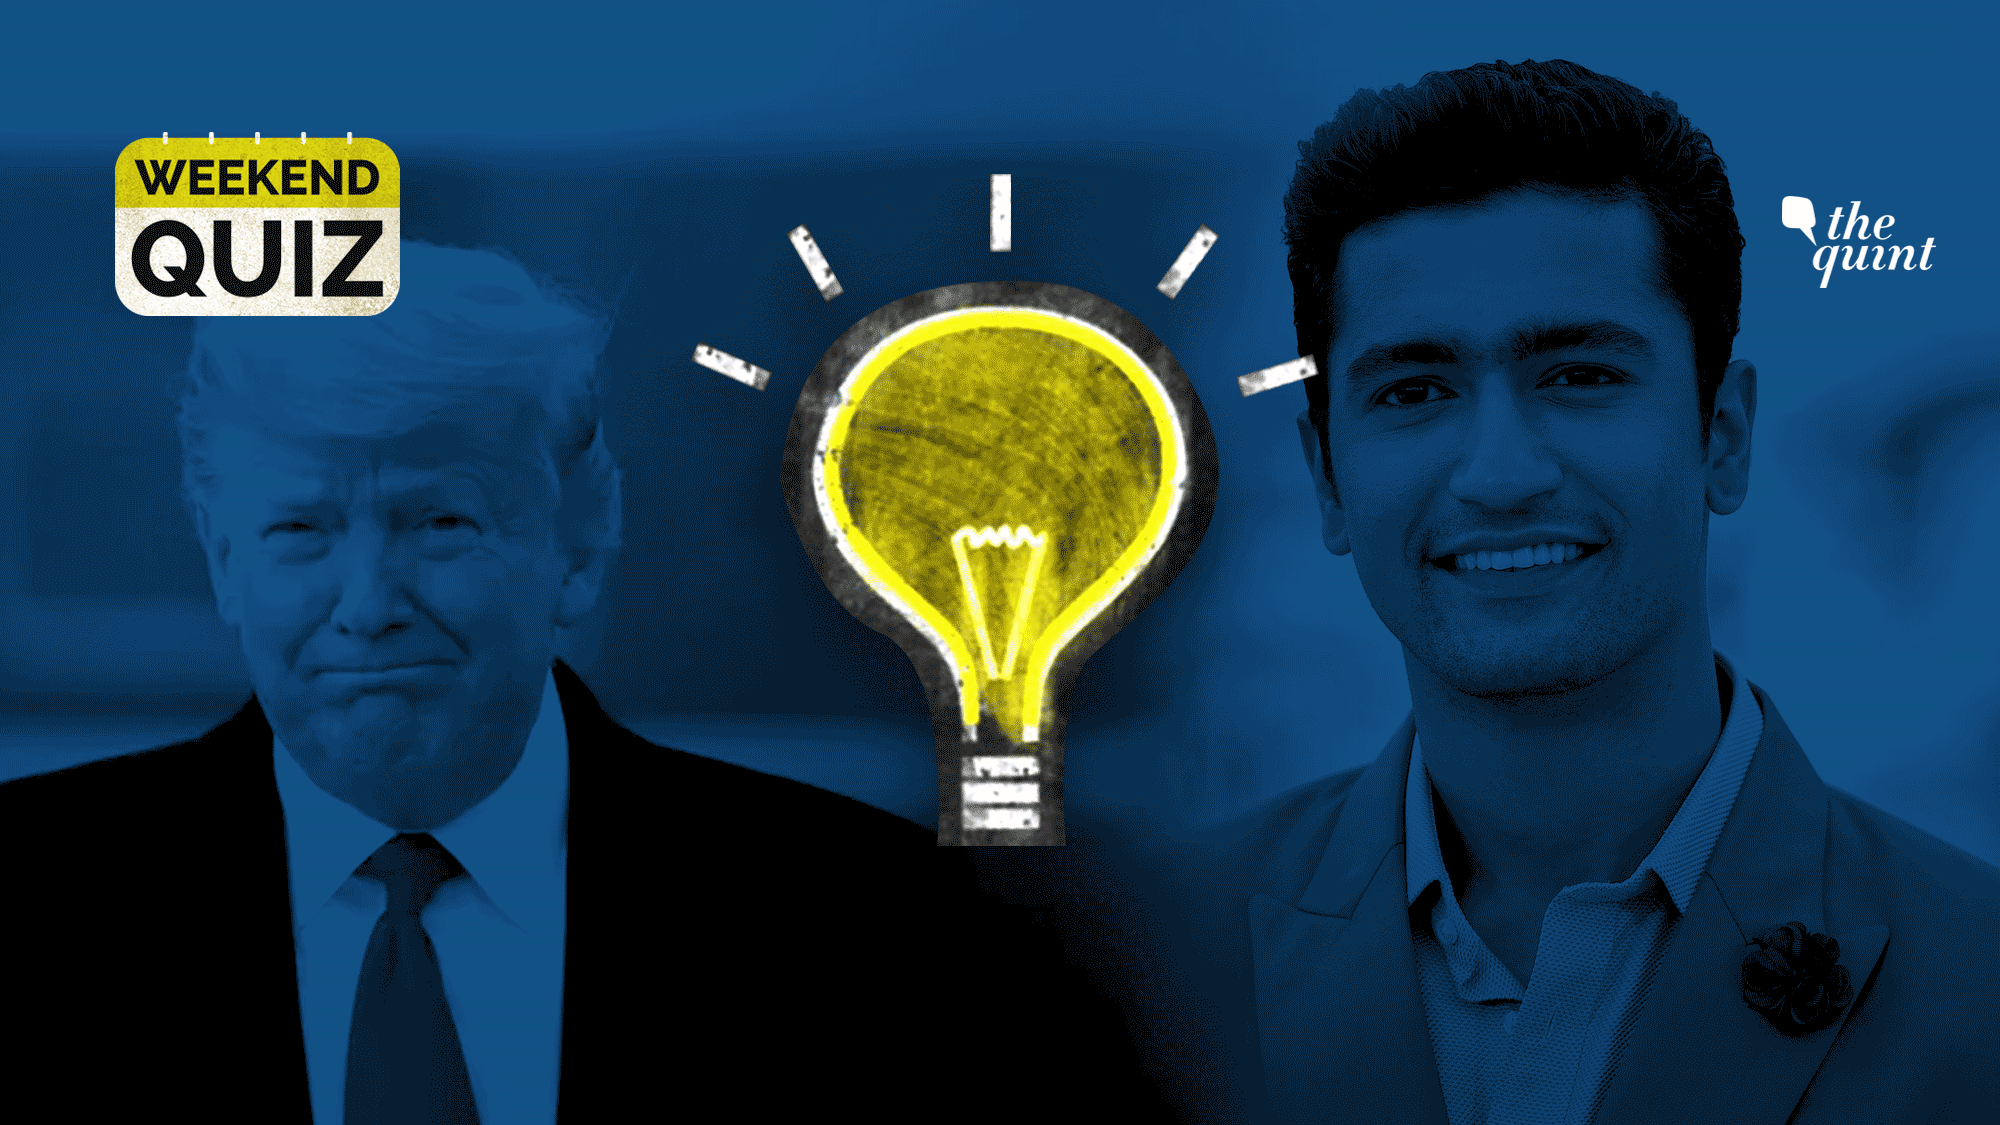 From US President Donald Trump’s India visit to Vicky Kaushal’s latest horror film, have you been tracking the news this week?